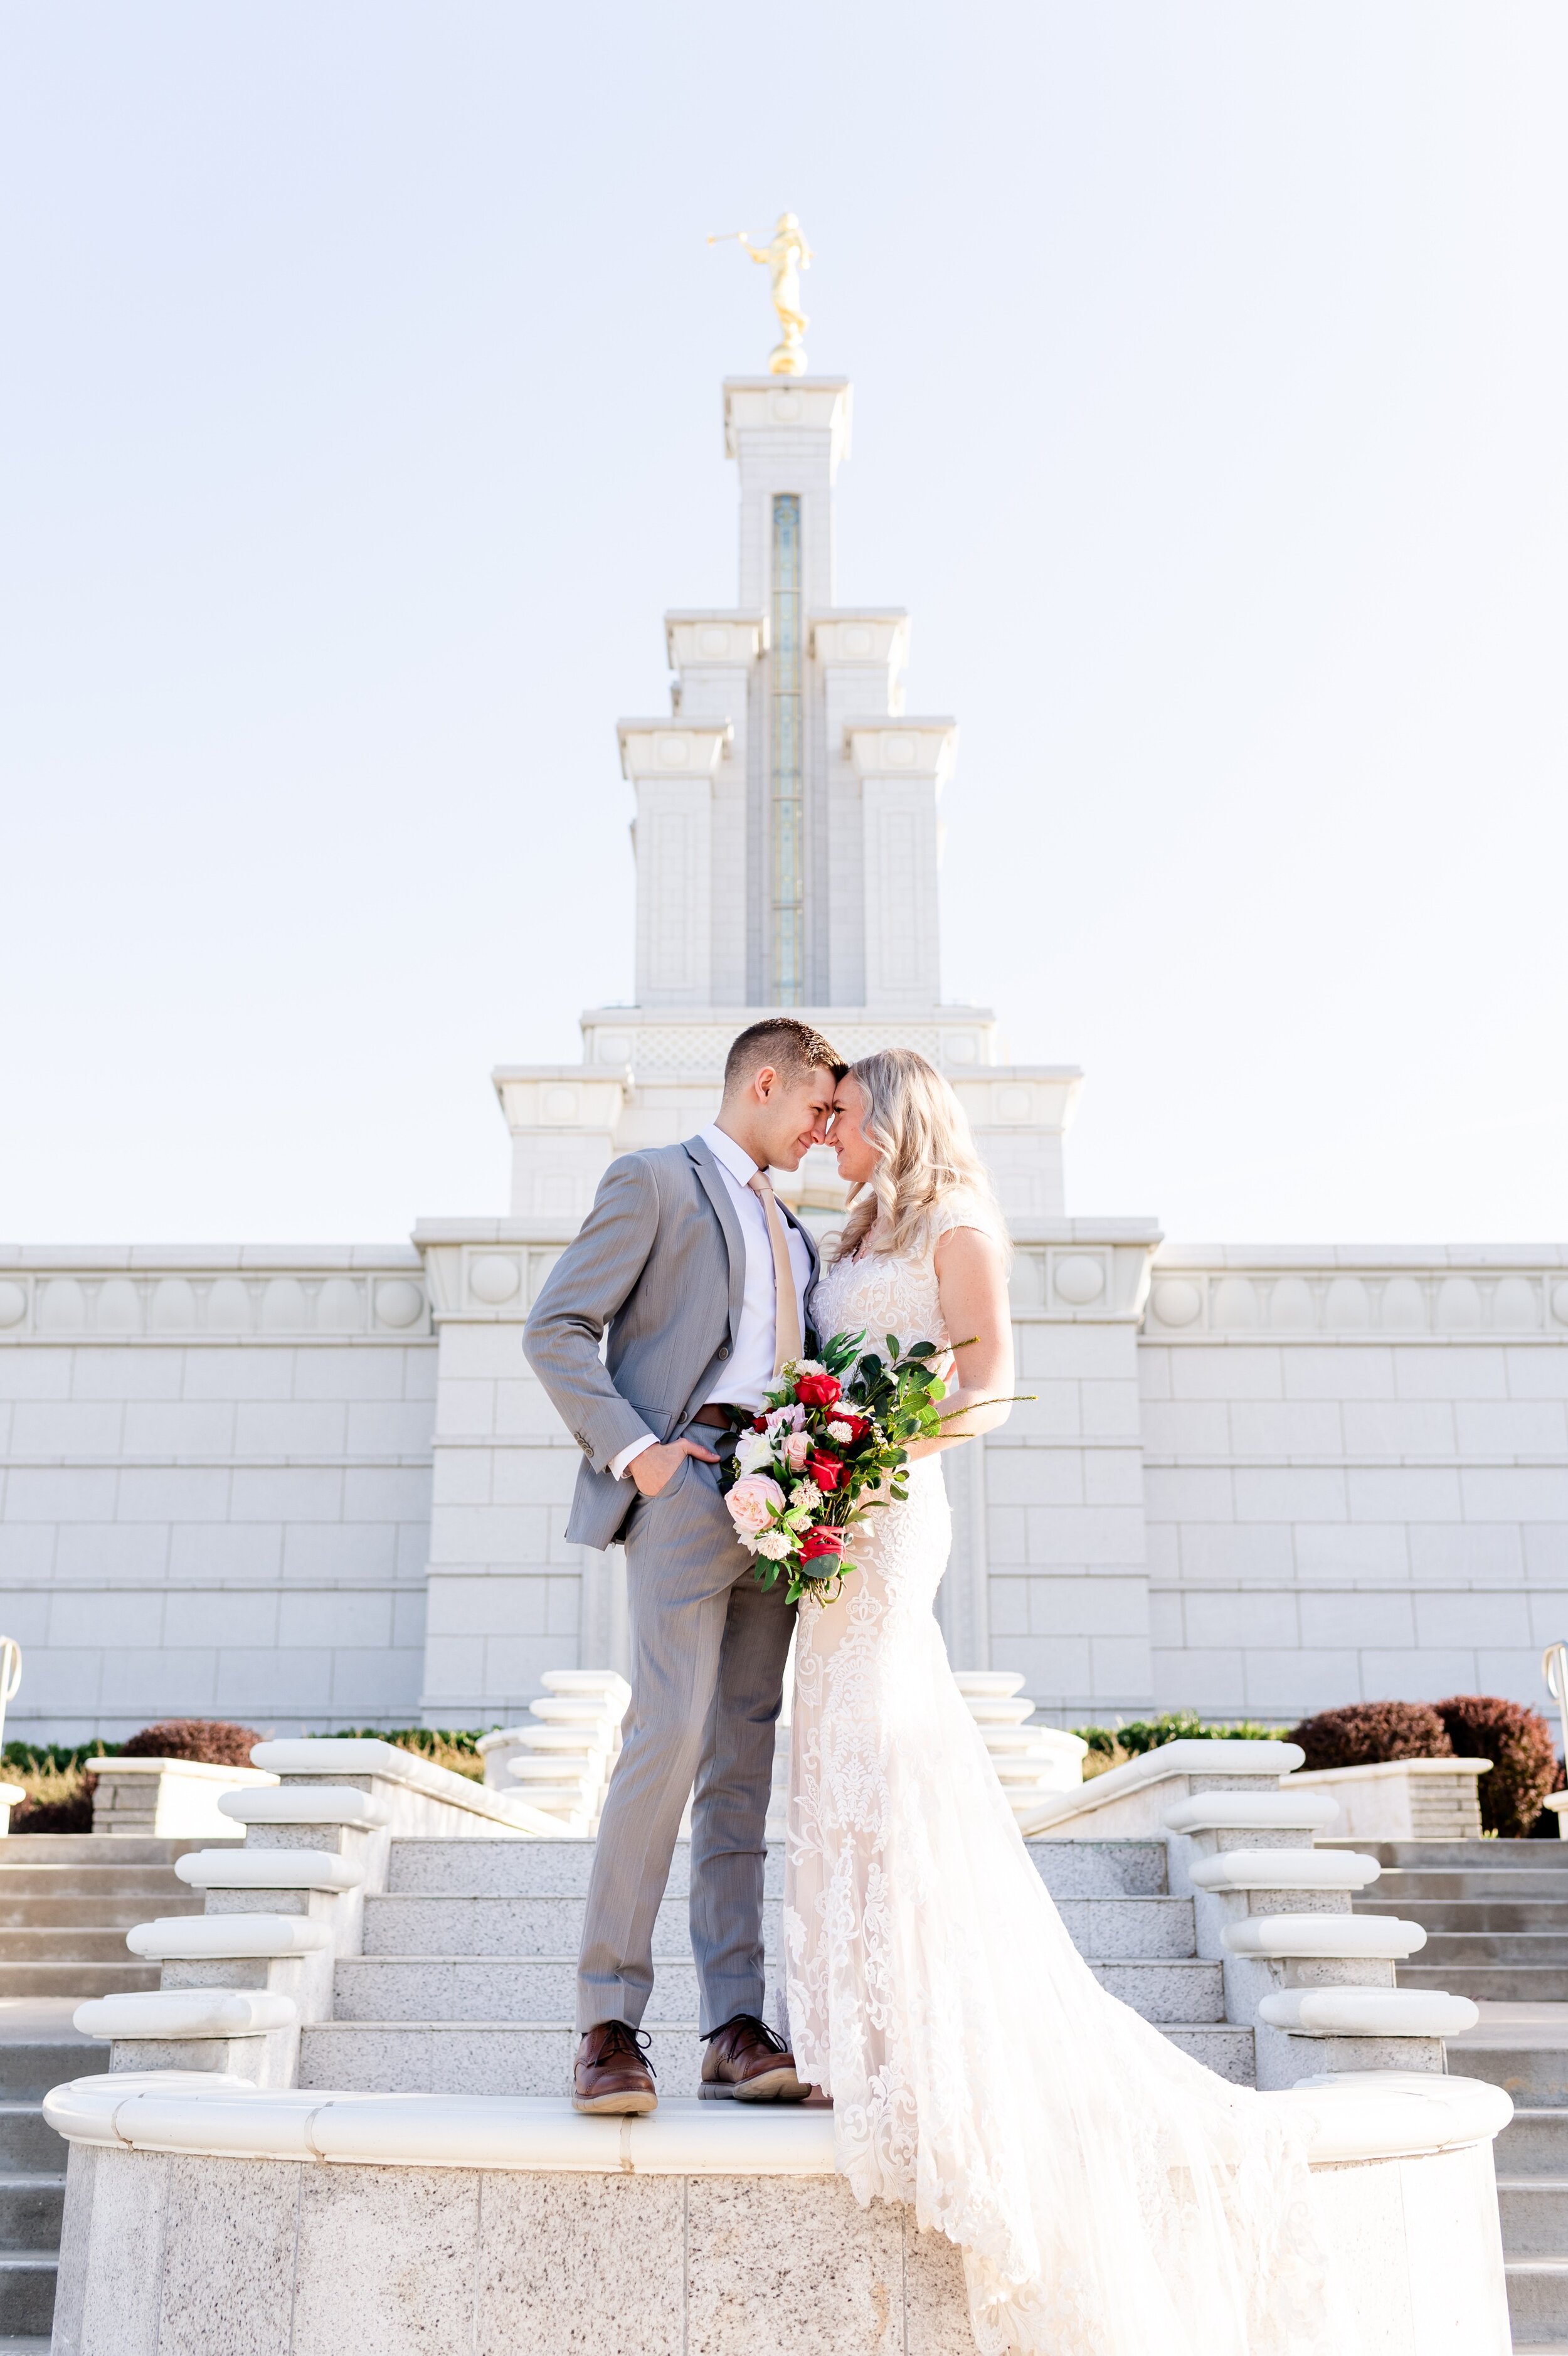 Red &amp; White Bouquet - Columbia River Washington Temple Bridals Wedding Photographer - Tri Cities Wedding Photographer - Morgan Tayler Photo &amp; Design - Moses Lake Temple Wedding Photographer